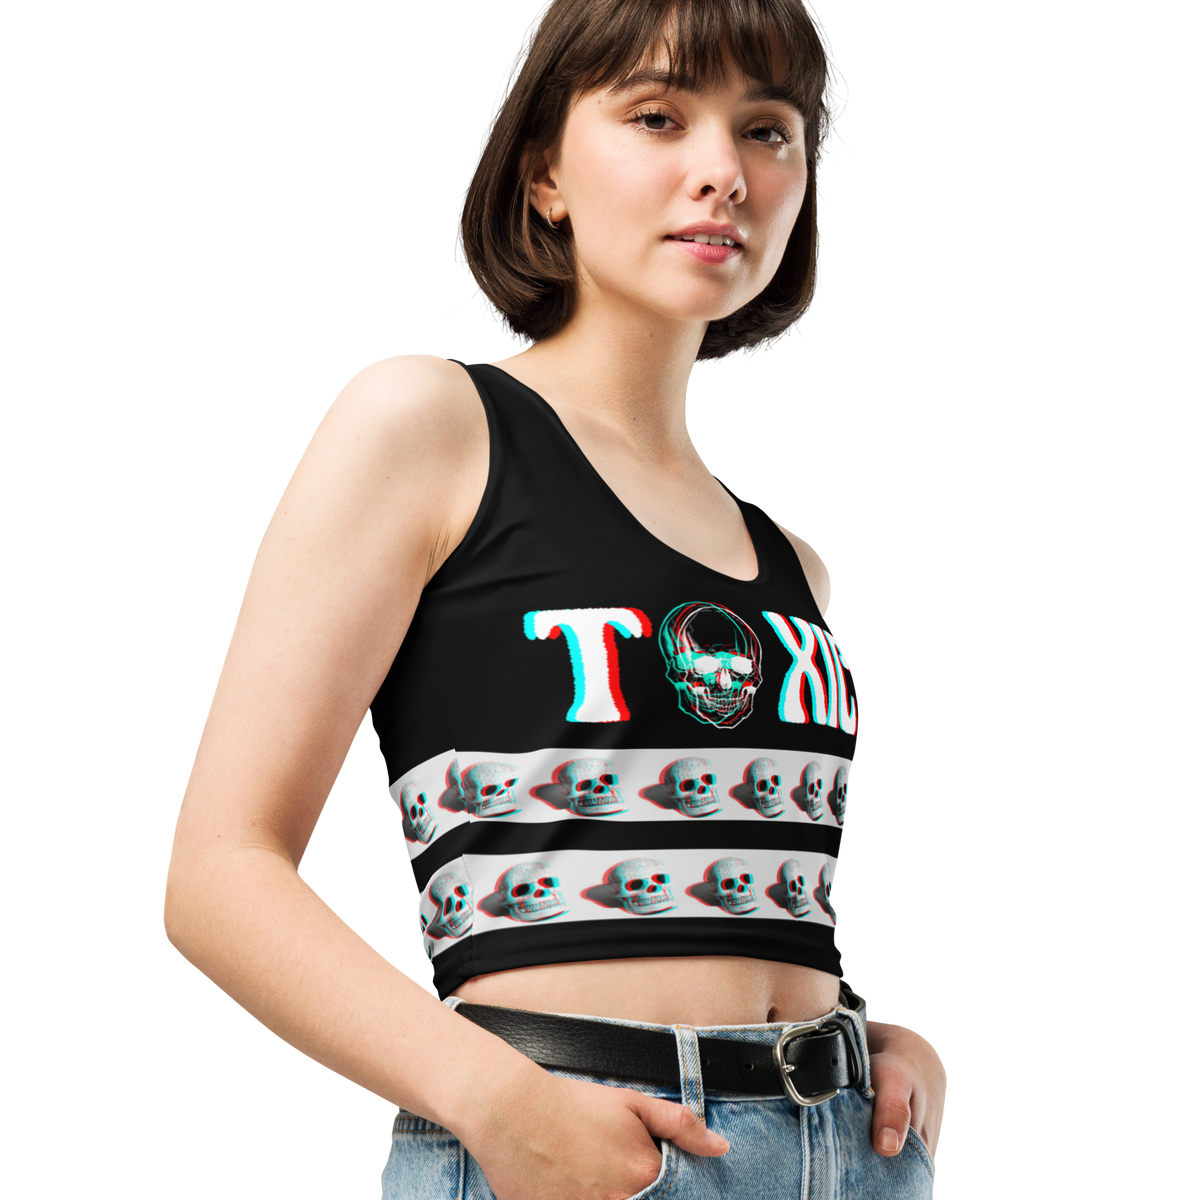 Skull Crop Top, Skulls Shirt, Stereotypical Rebellious Shirt, Rockabilly Crop Top, Punk Rocker, Hot Topic type, Goth Top, Emo, Gift for Her 